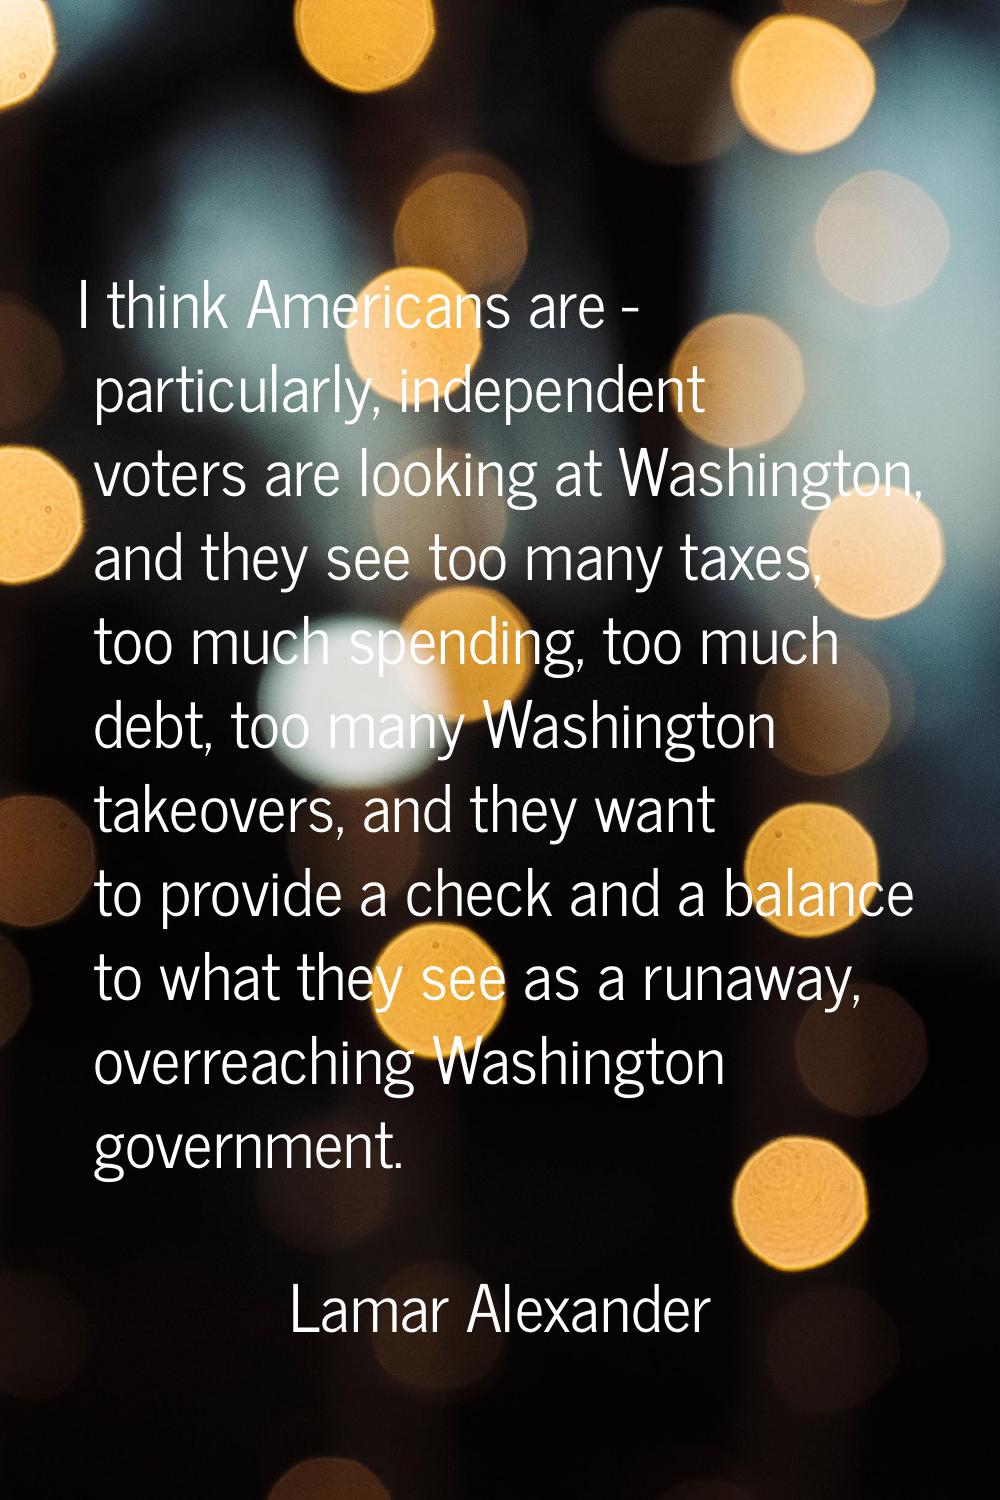 I think Americans are - particularly, independent voters are looking at Washington, and they see to